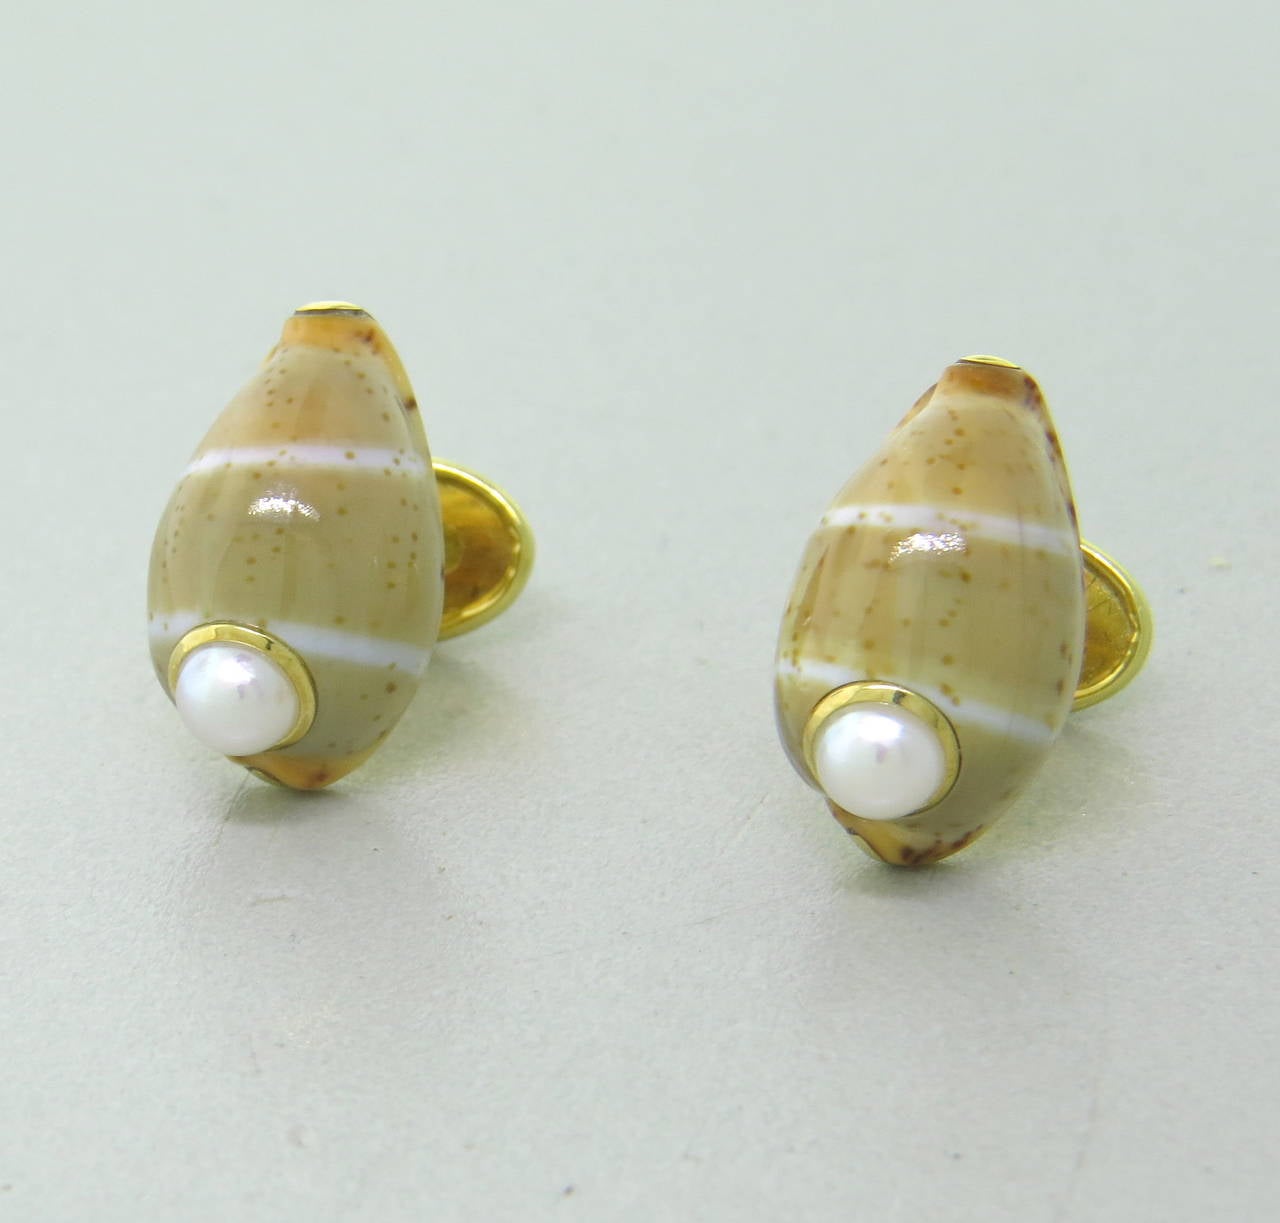 18k gold shell cufflinks by Trianon with pearls. Top of the cufflink measures 18mm x 12m.  weigh - 7 gr